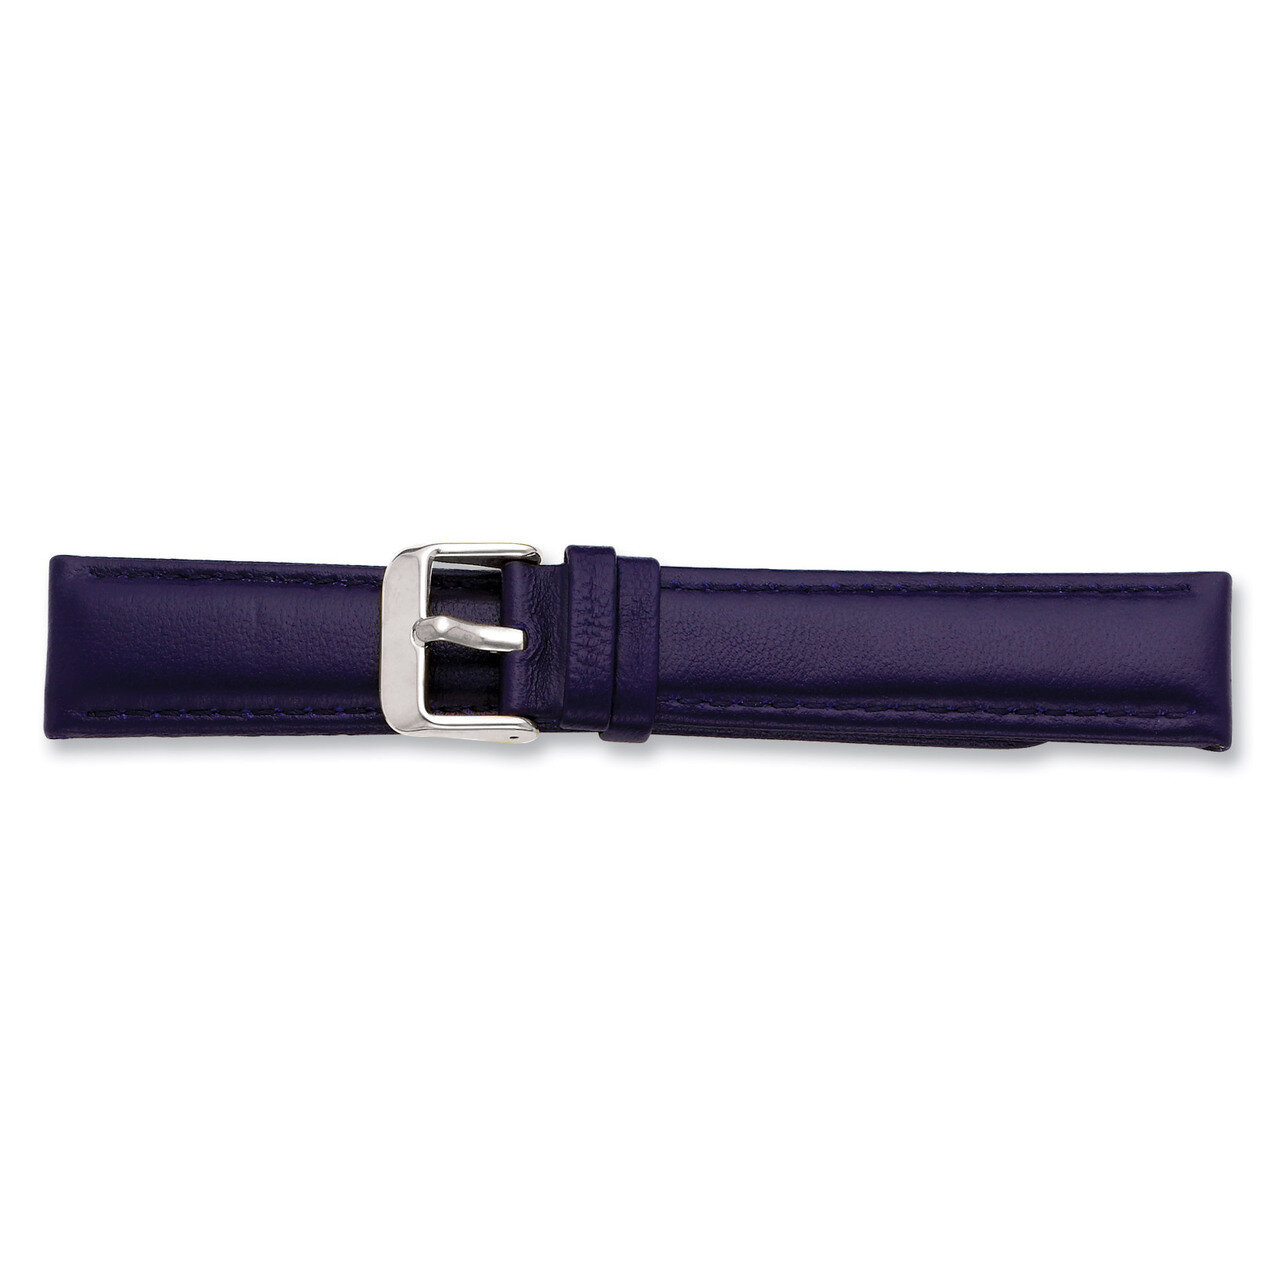 22mm Navy Glove Leather Watch Band 7.75 Inch Silver-tone Buckle BAW198-22